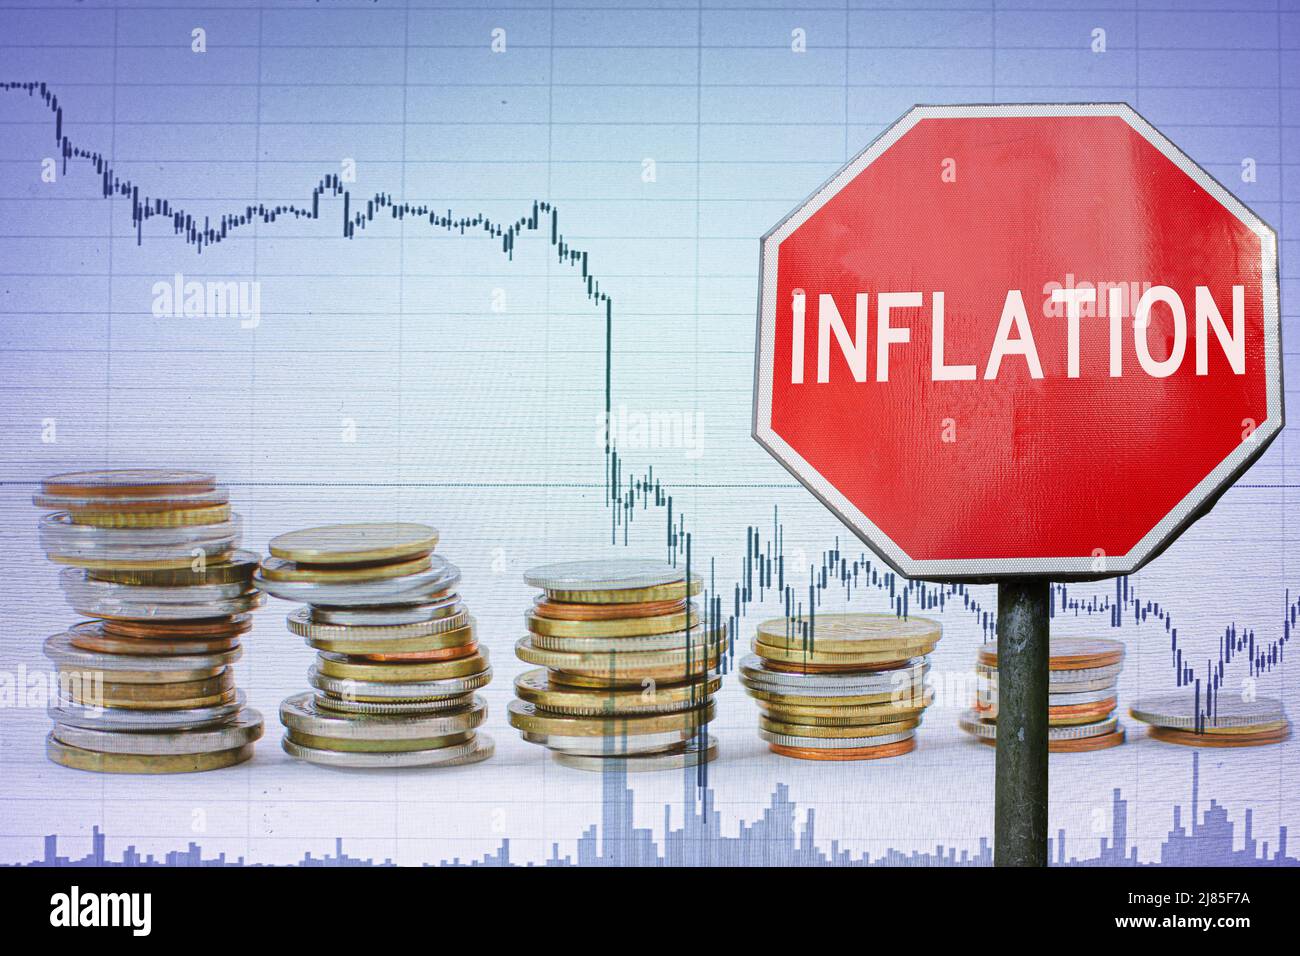 Inflation sign on economy background - graph and coins. Stock Photo